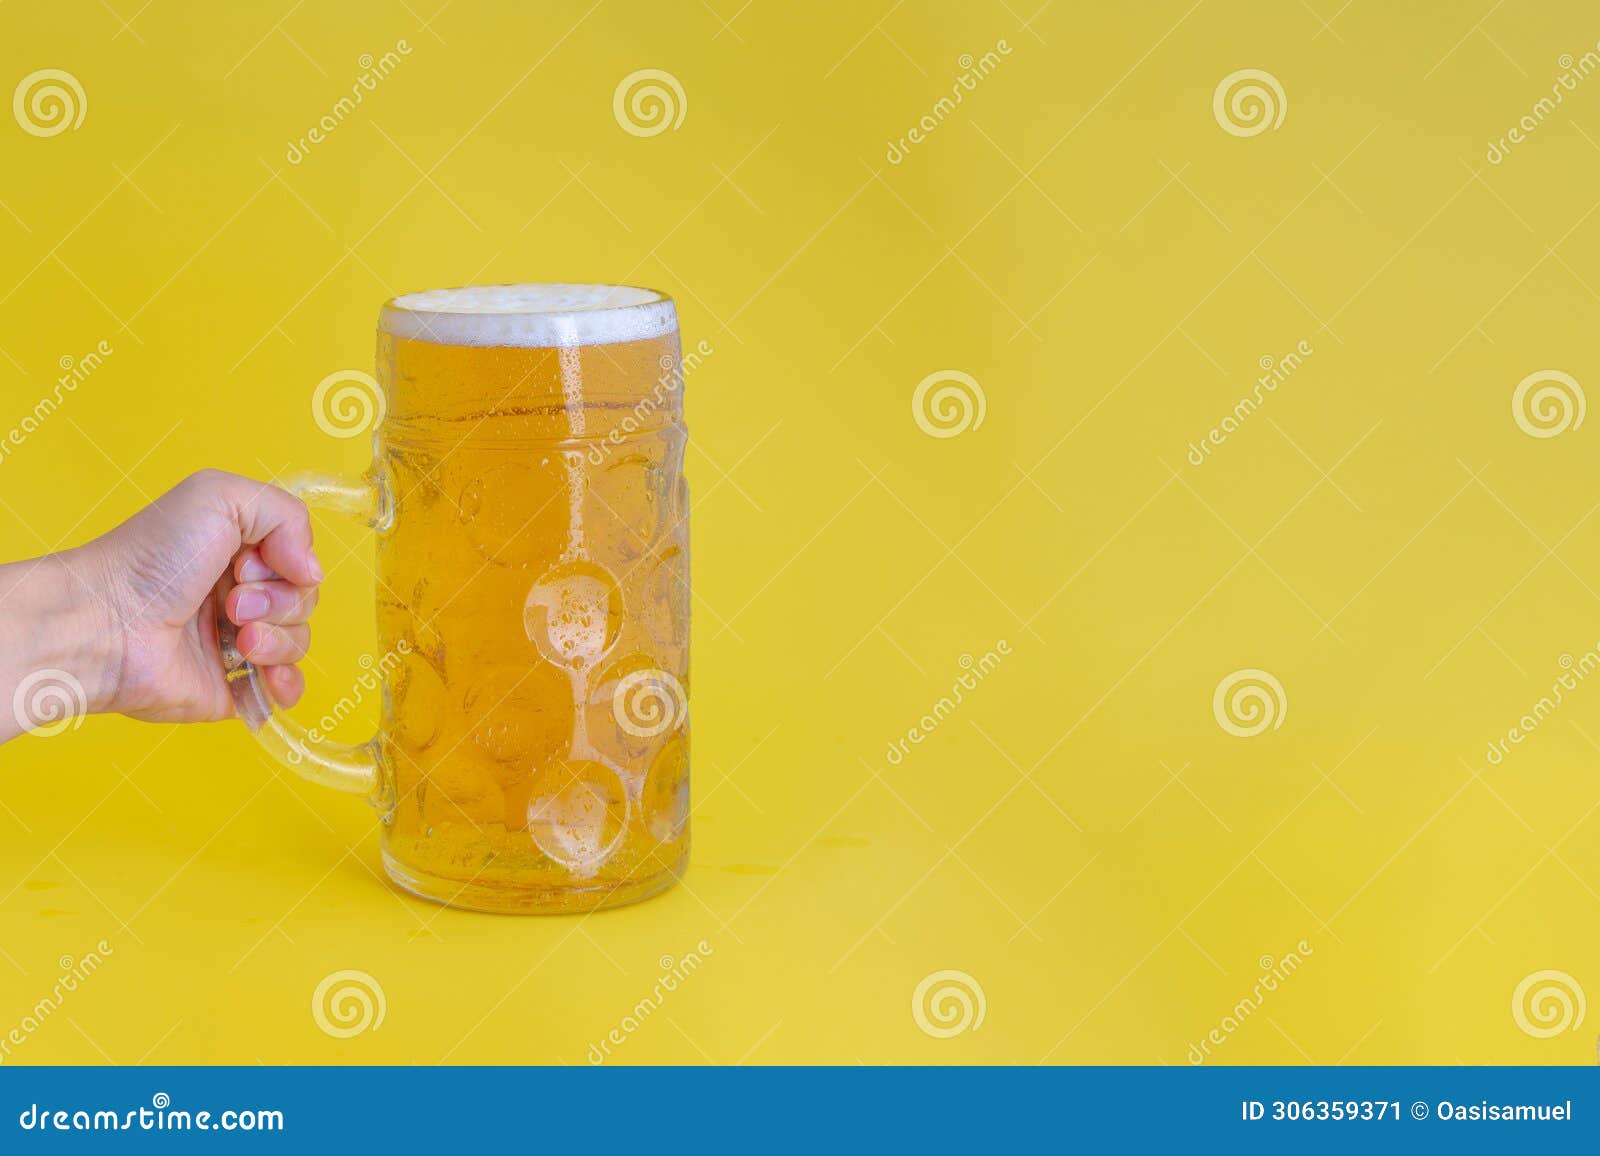 a person holding an oktoberfest glass beer stein or giant one litre beer glass stein tankard